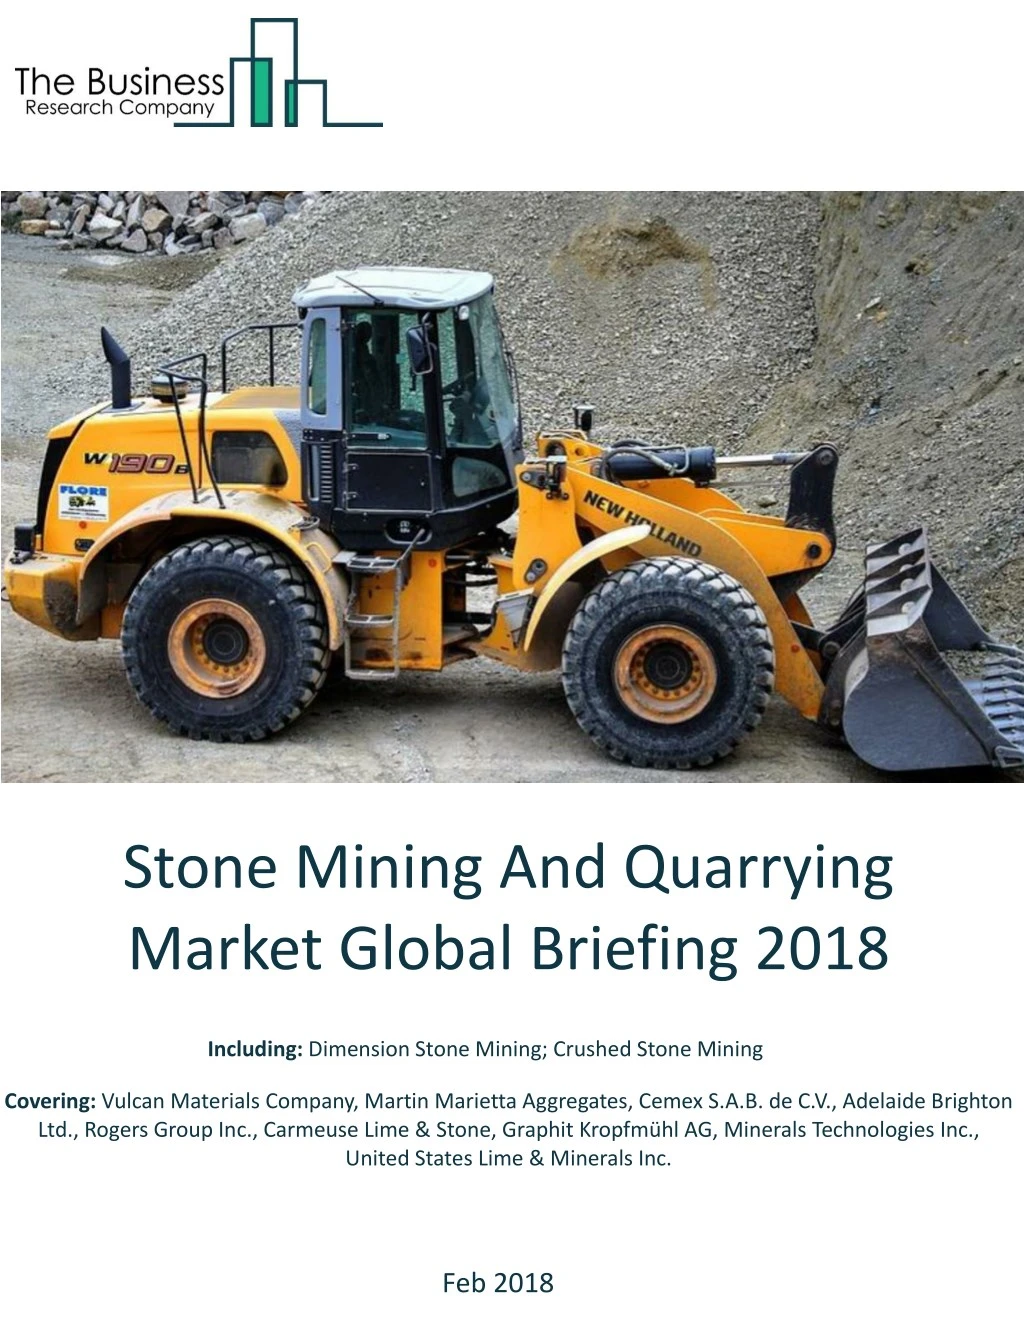 stone mining and quarrying market global briefing